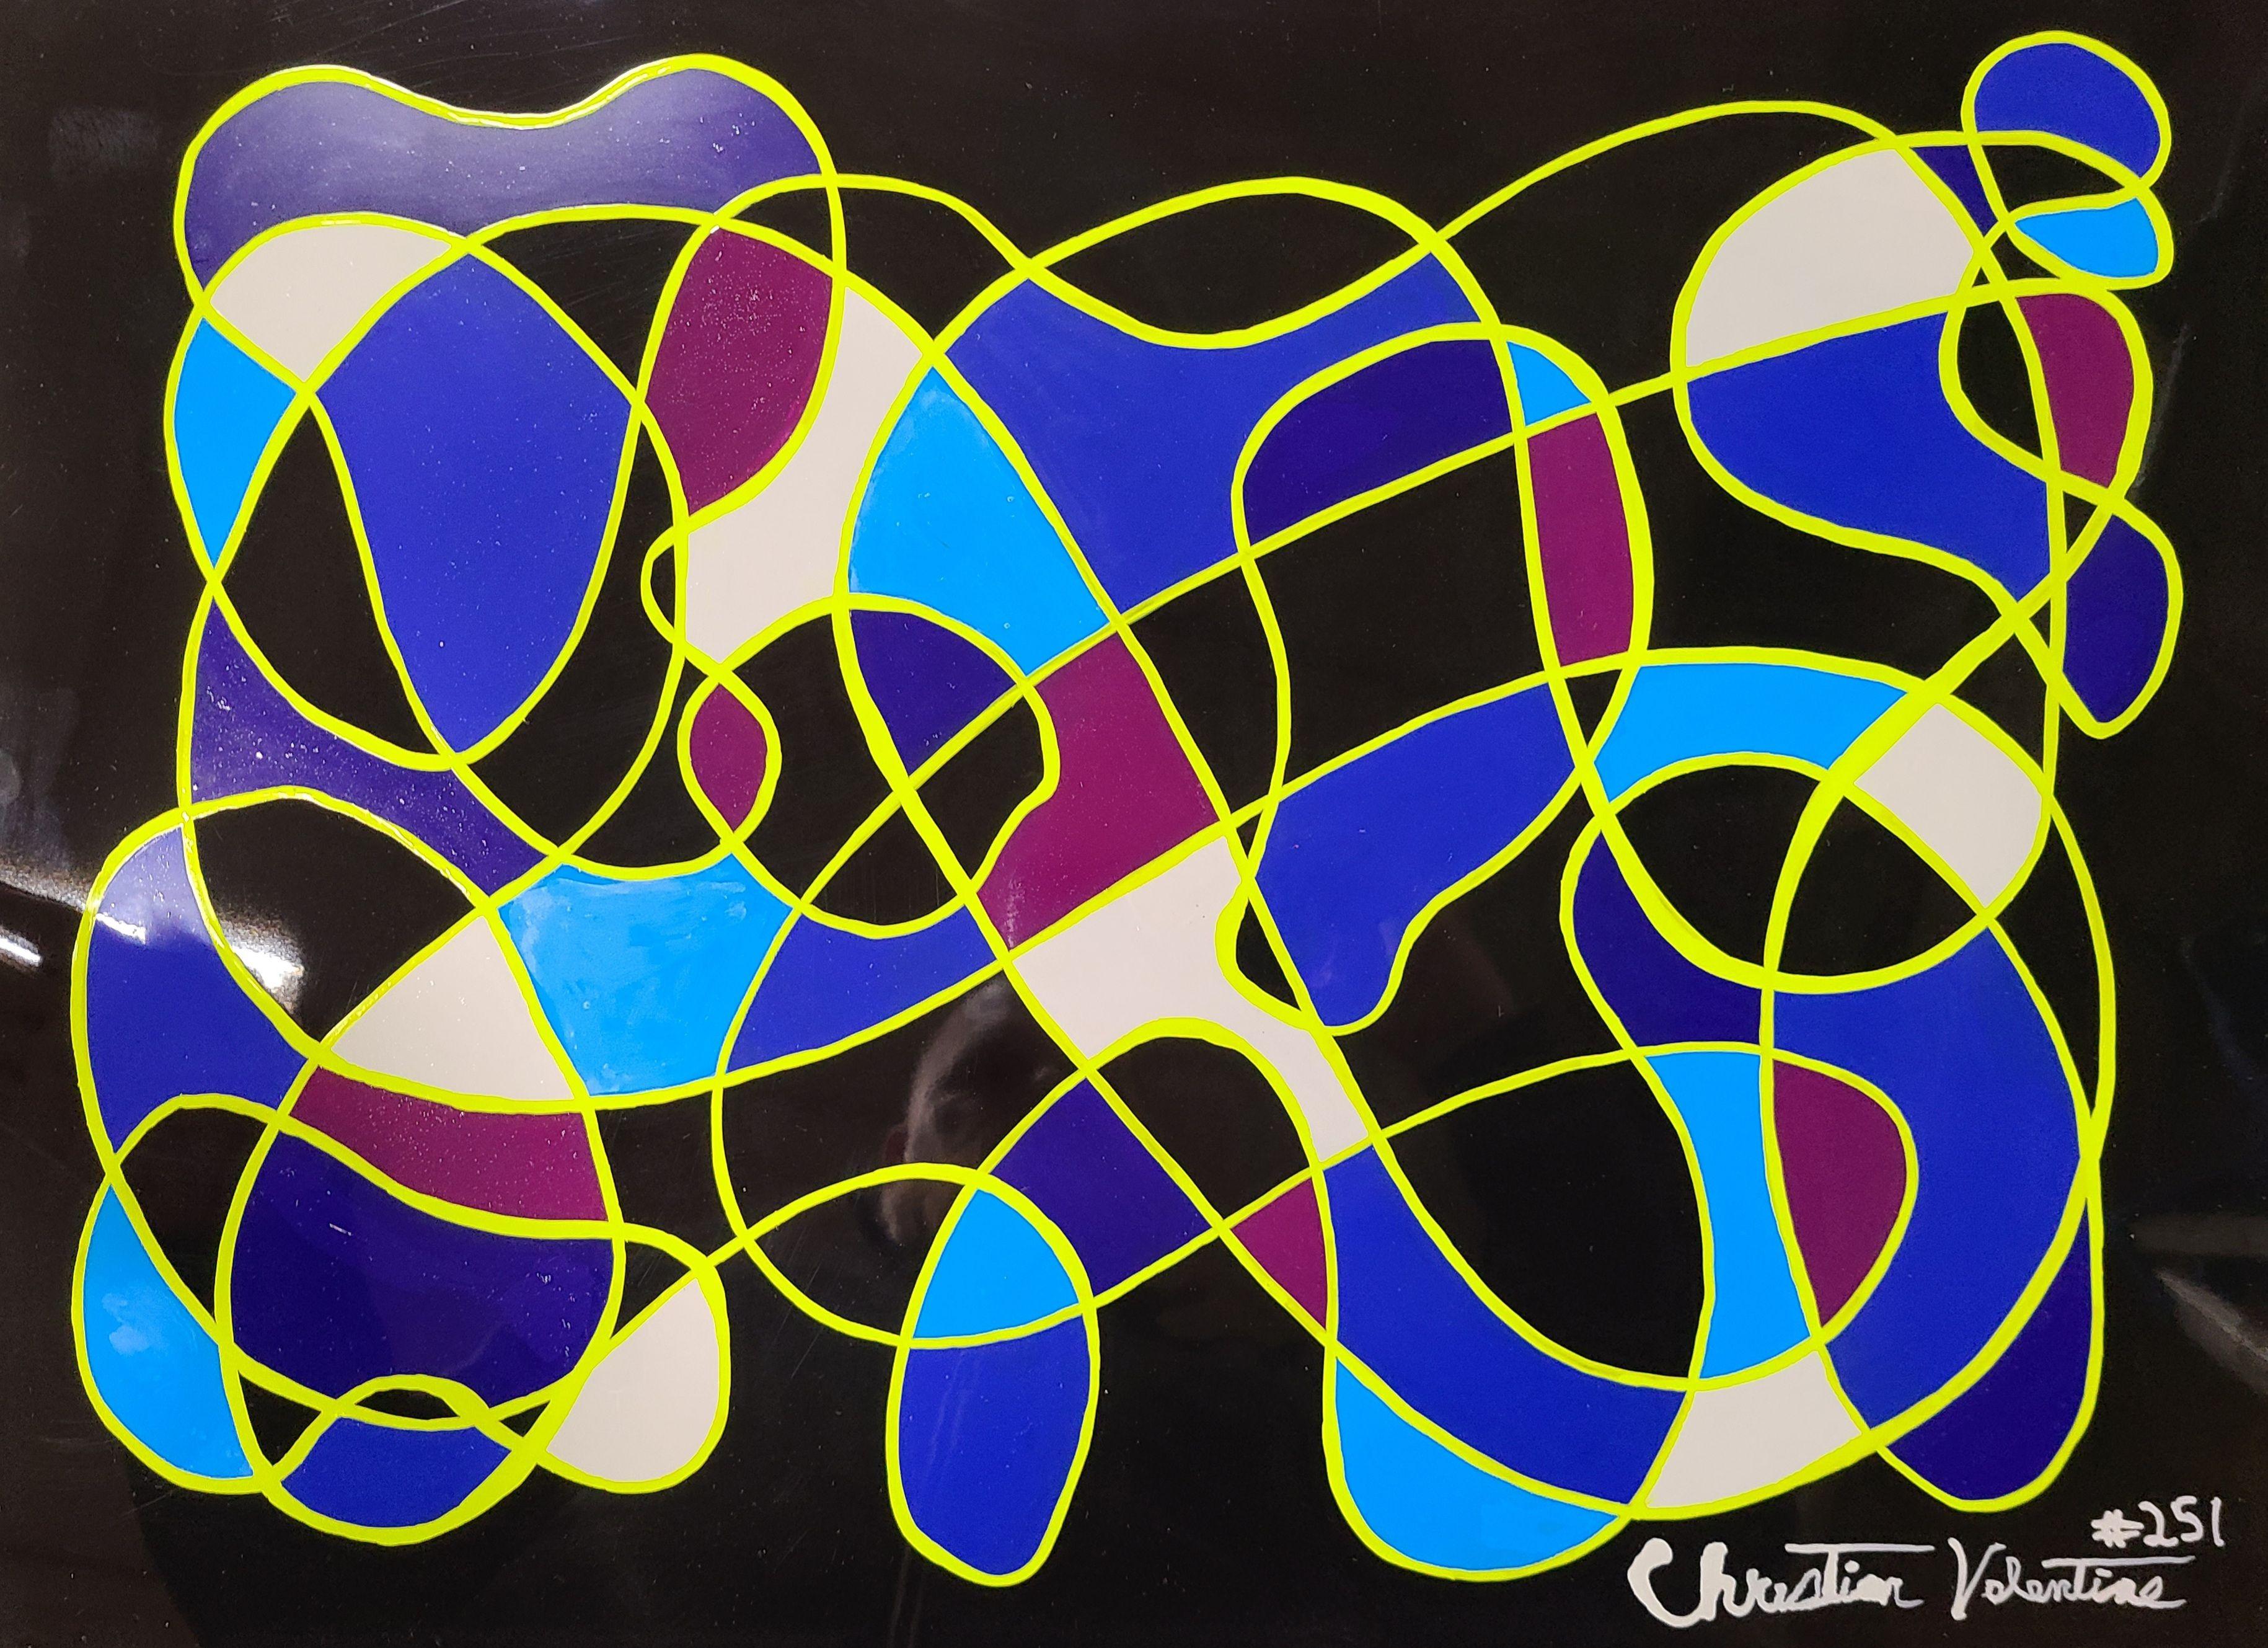 Christian Valentine Abstract Painting - Southpaw, Painting, Acrylic on Metal